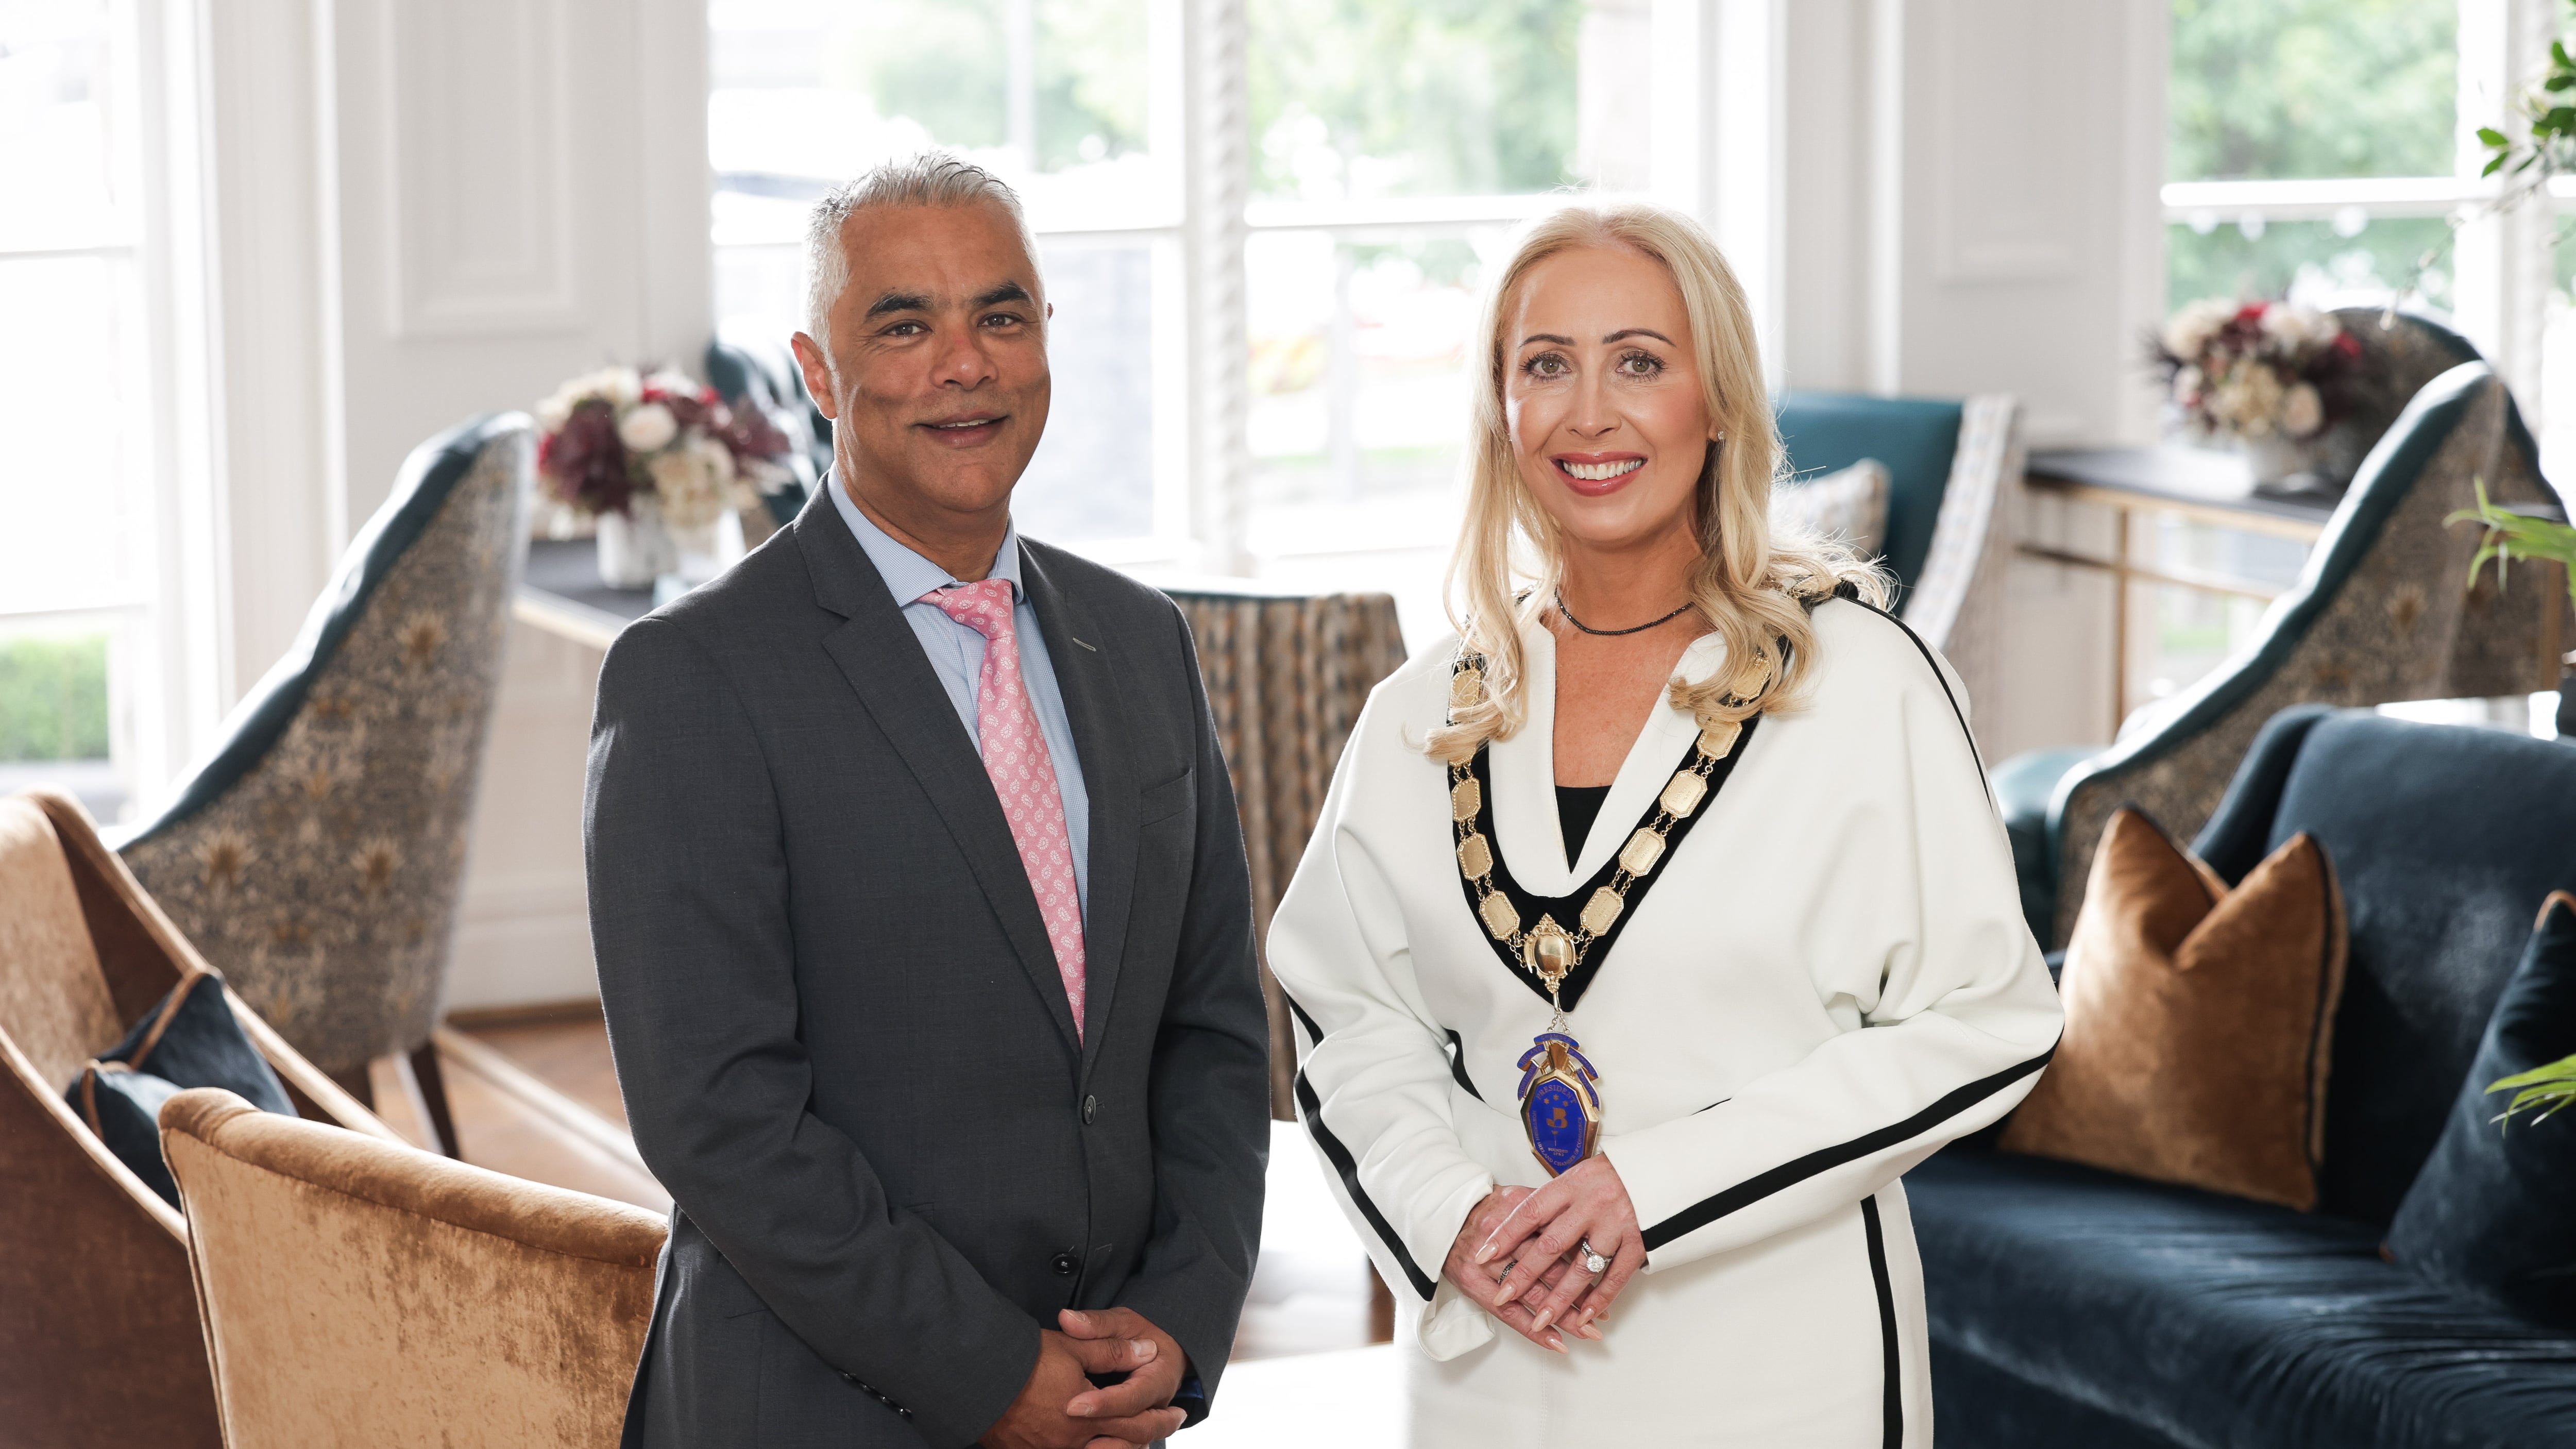 Cat McCusker (President, NI Chamber) and Kailash Chada (Vice President NI Chamber)